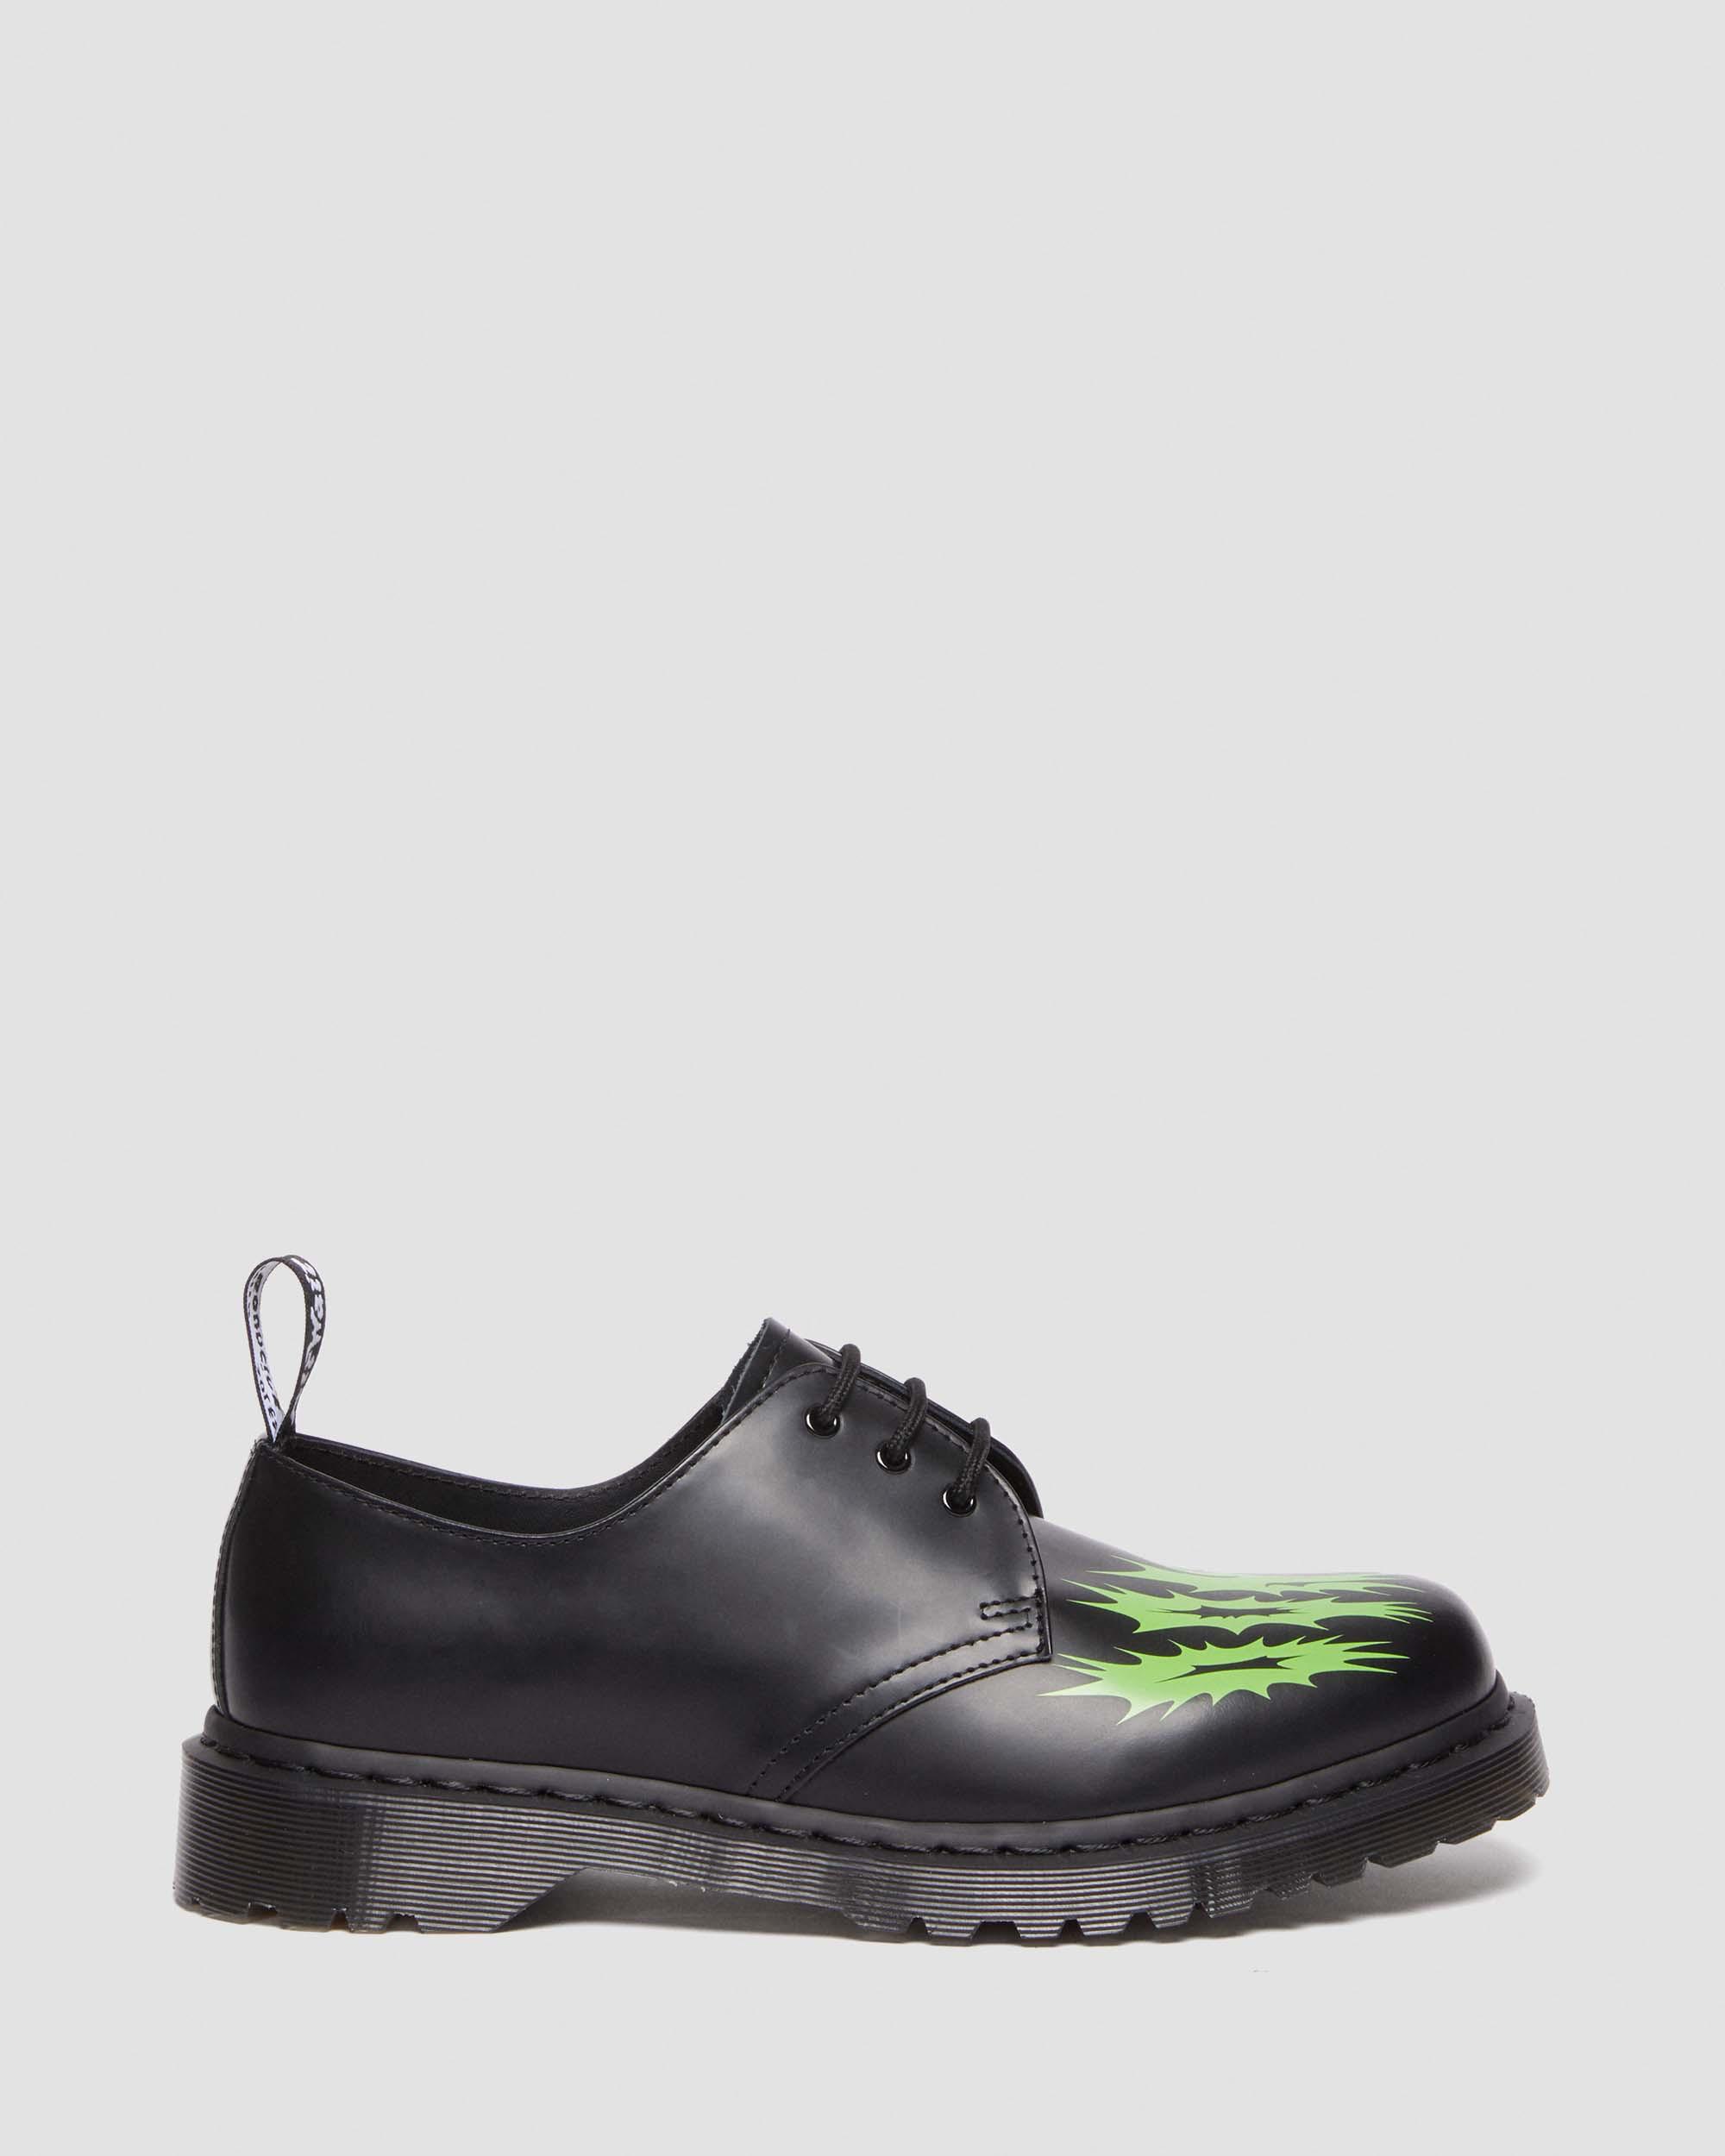 1461 NTS Leather Shoes1461 NTS Leather Shoes Dr. Martens